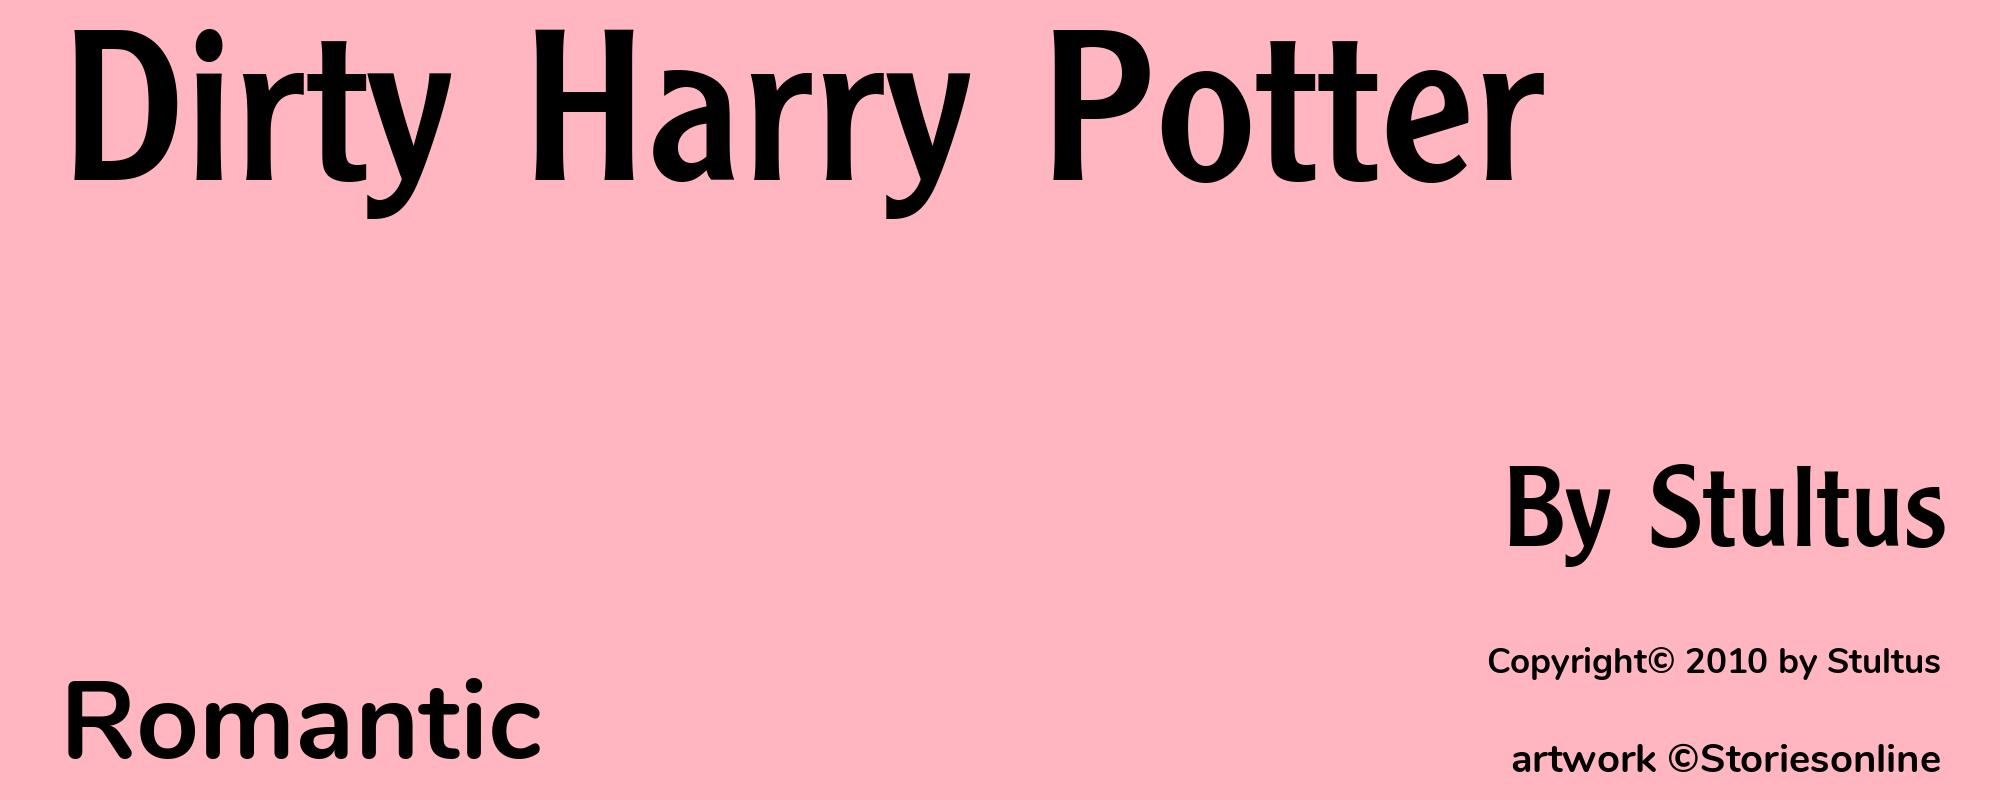 Dirty Harry Potter - Cover